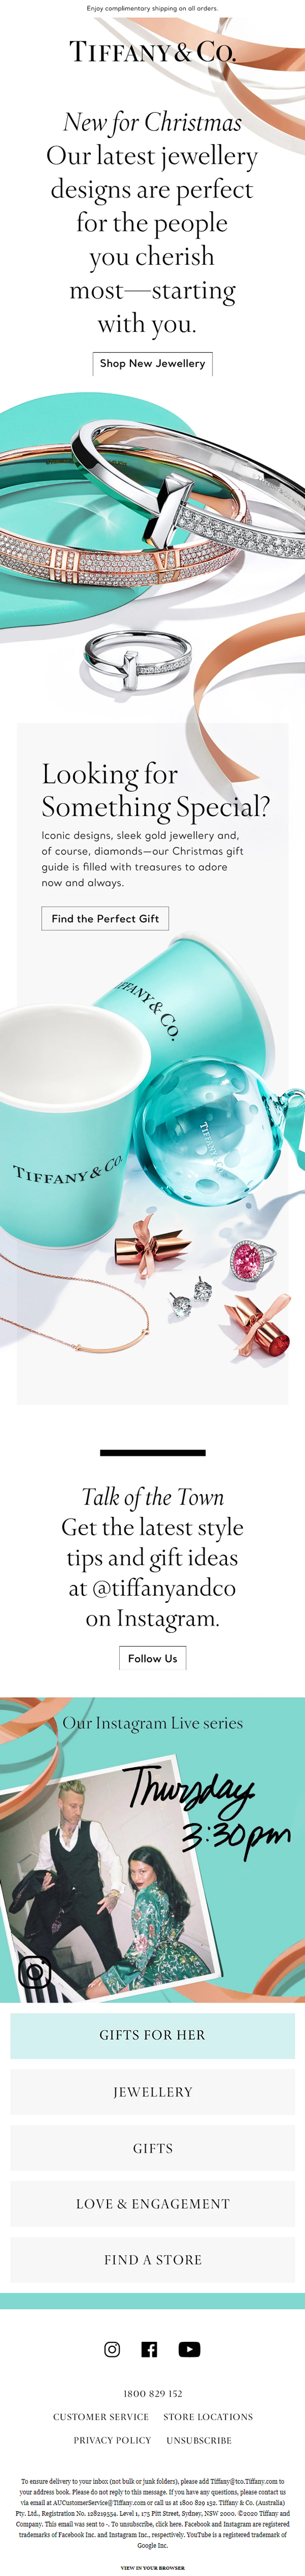  iffany & co.- Christmas email